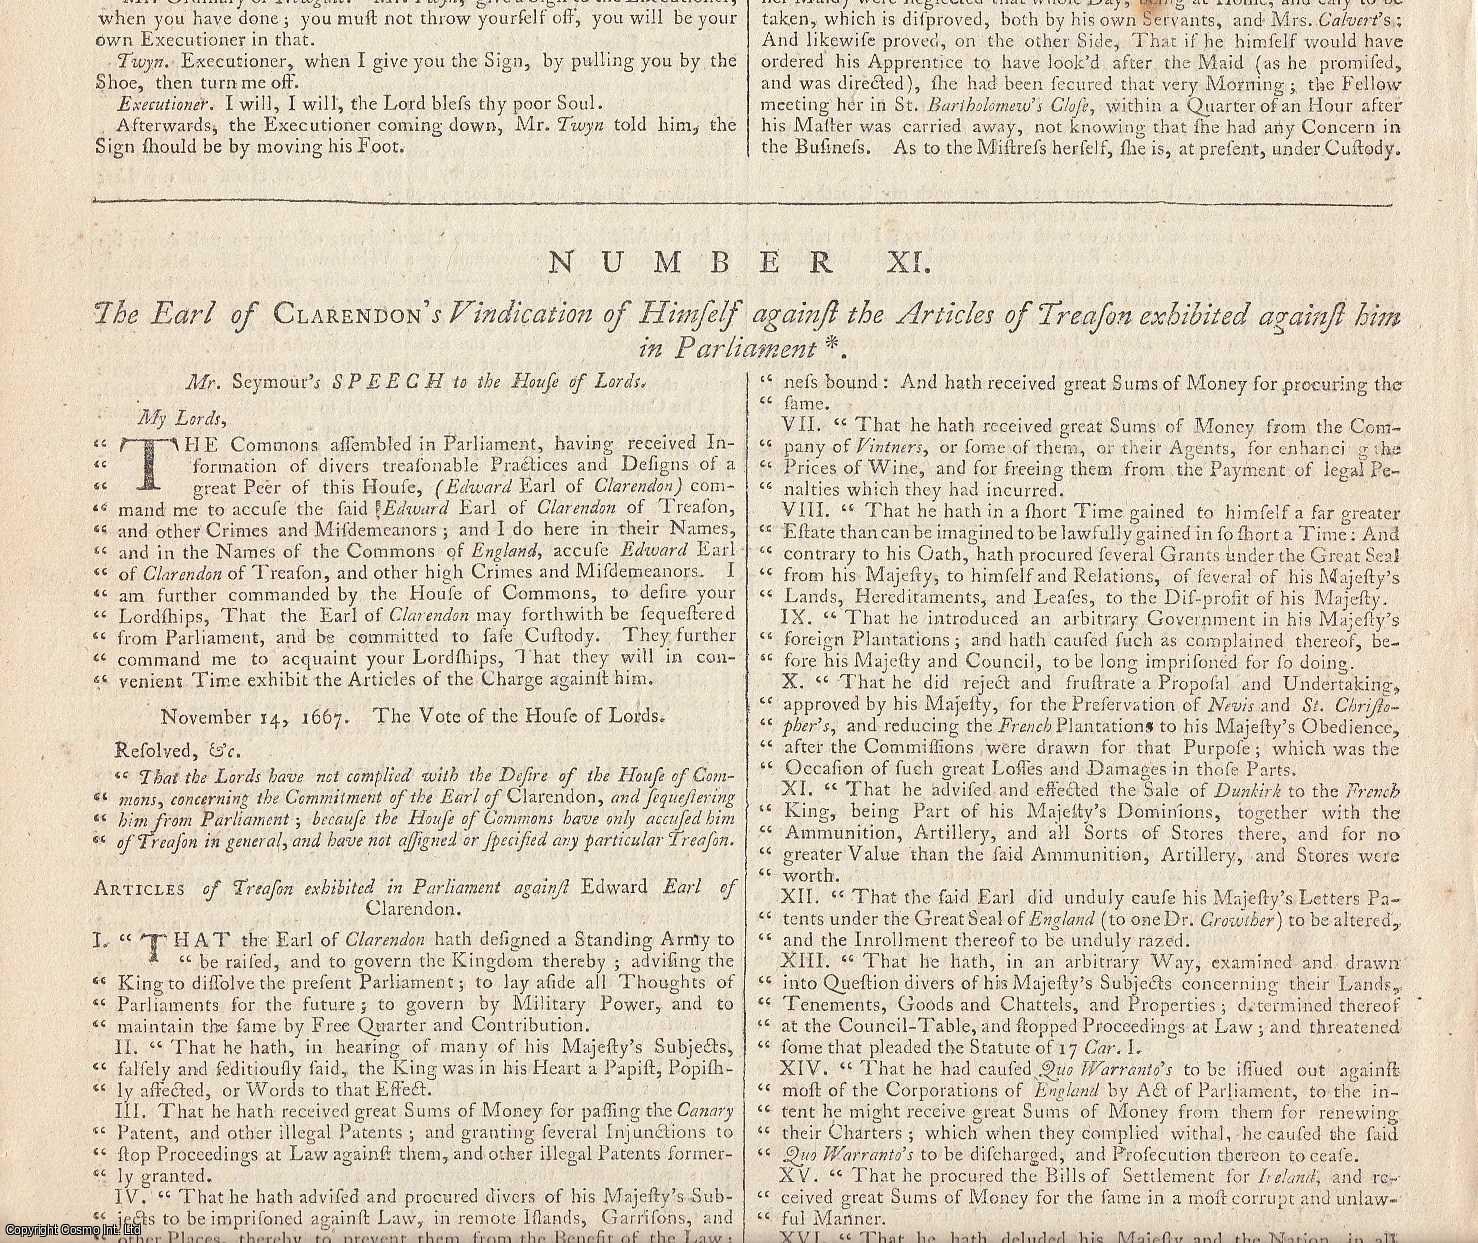 [Trial] - BANISHMENT OF CLARENDON. The Earl of Clarendon's Vindication of Himself against the Articles of Treason exhibited against him in Parliament. Montpelier, July 24, 1668. An original article from the Collected State Trials::Large Folio, 1778.